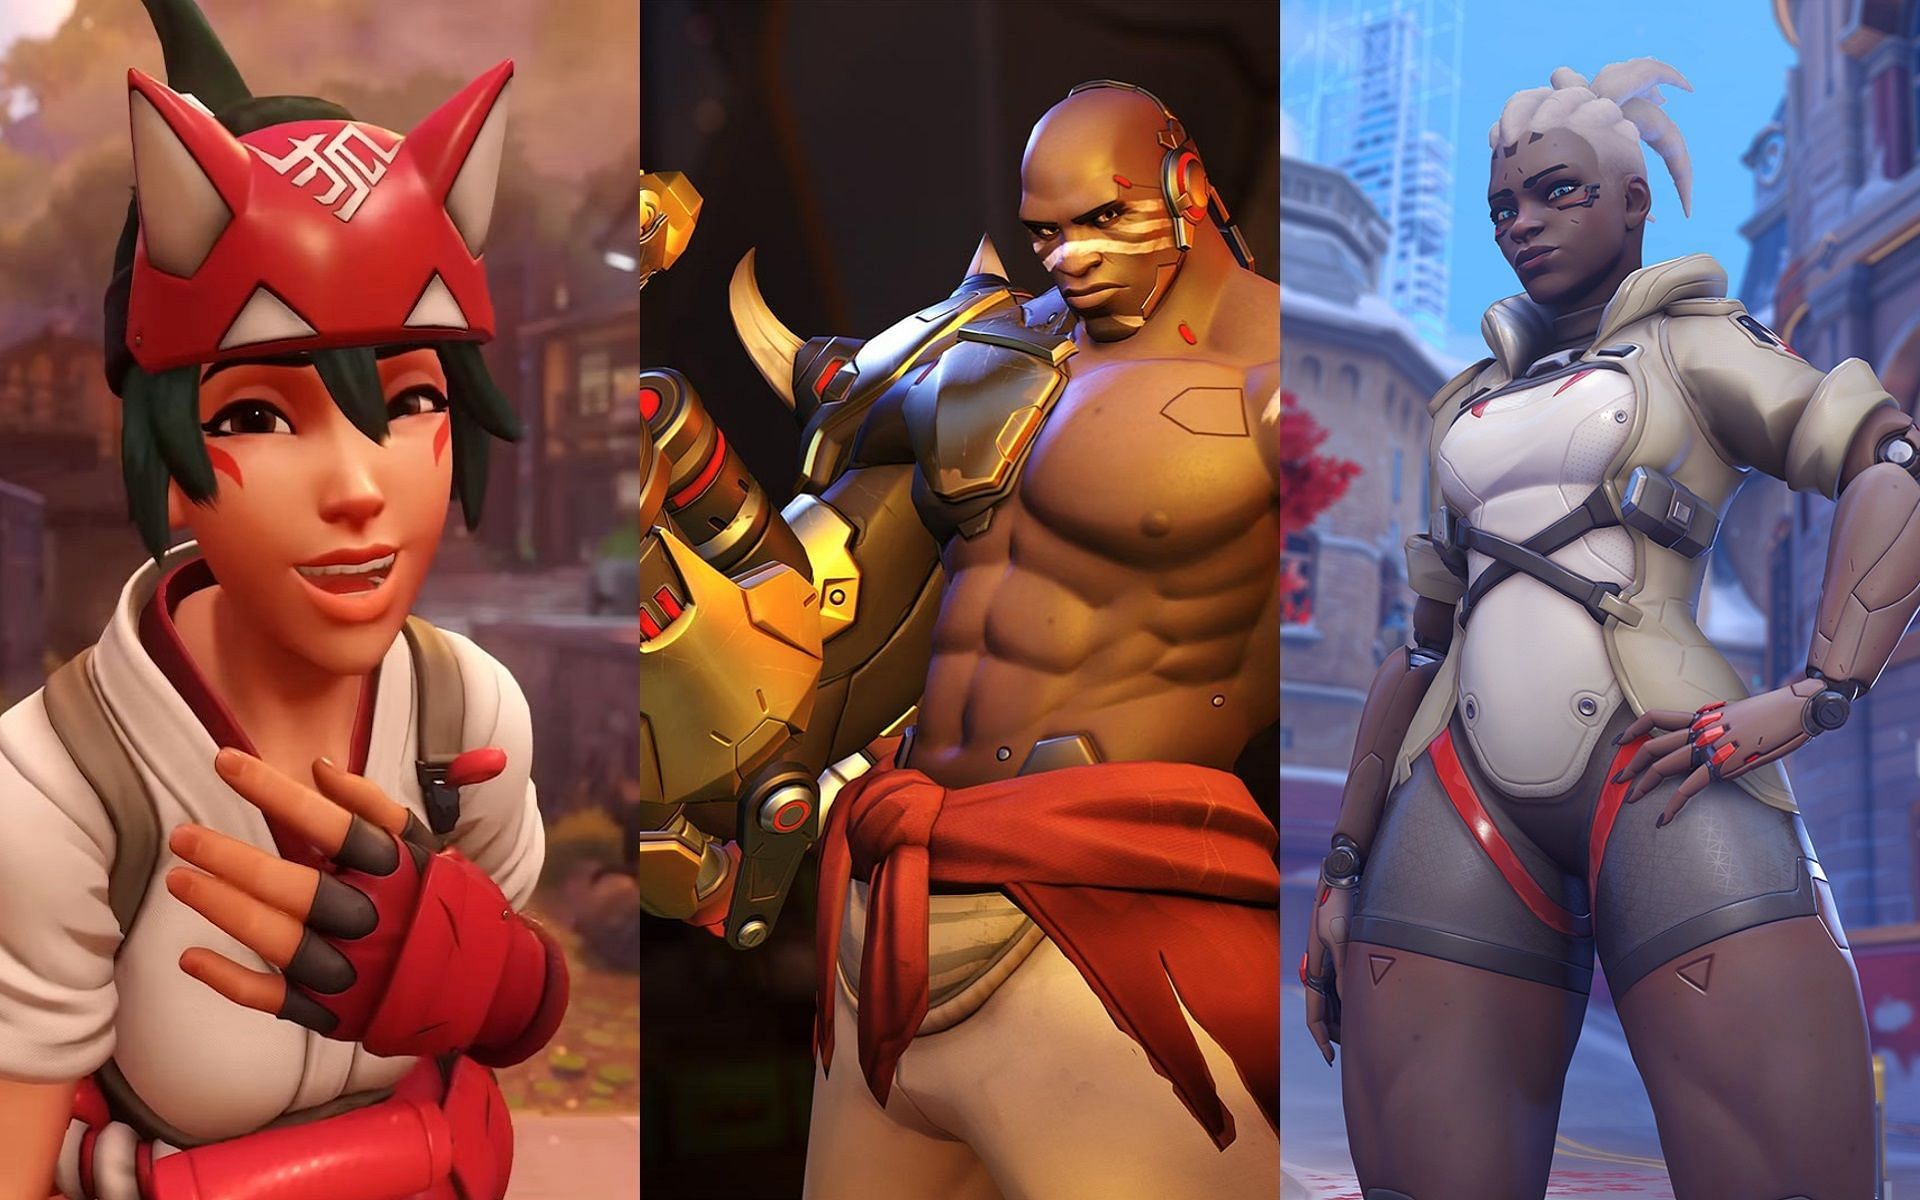 Kiriko, Doomfist, Sojourn, and more received changes in Overwatch 2 Season 2 (Images via Blizzard Entertainment)